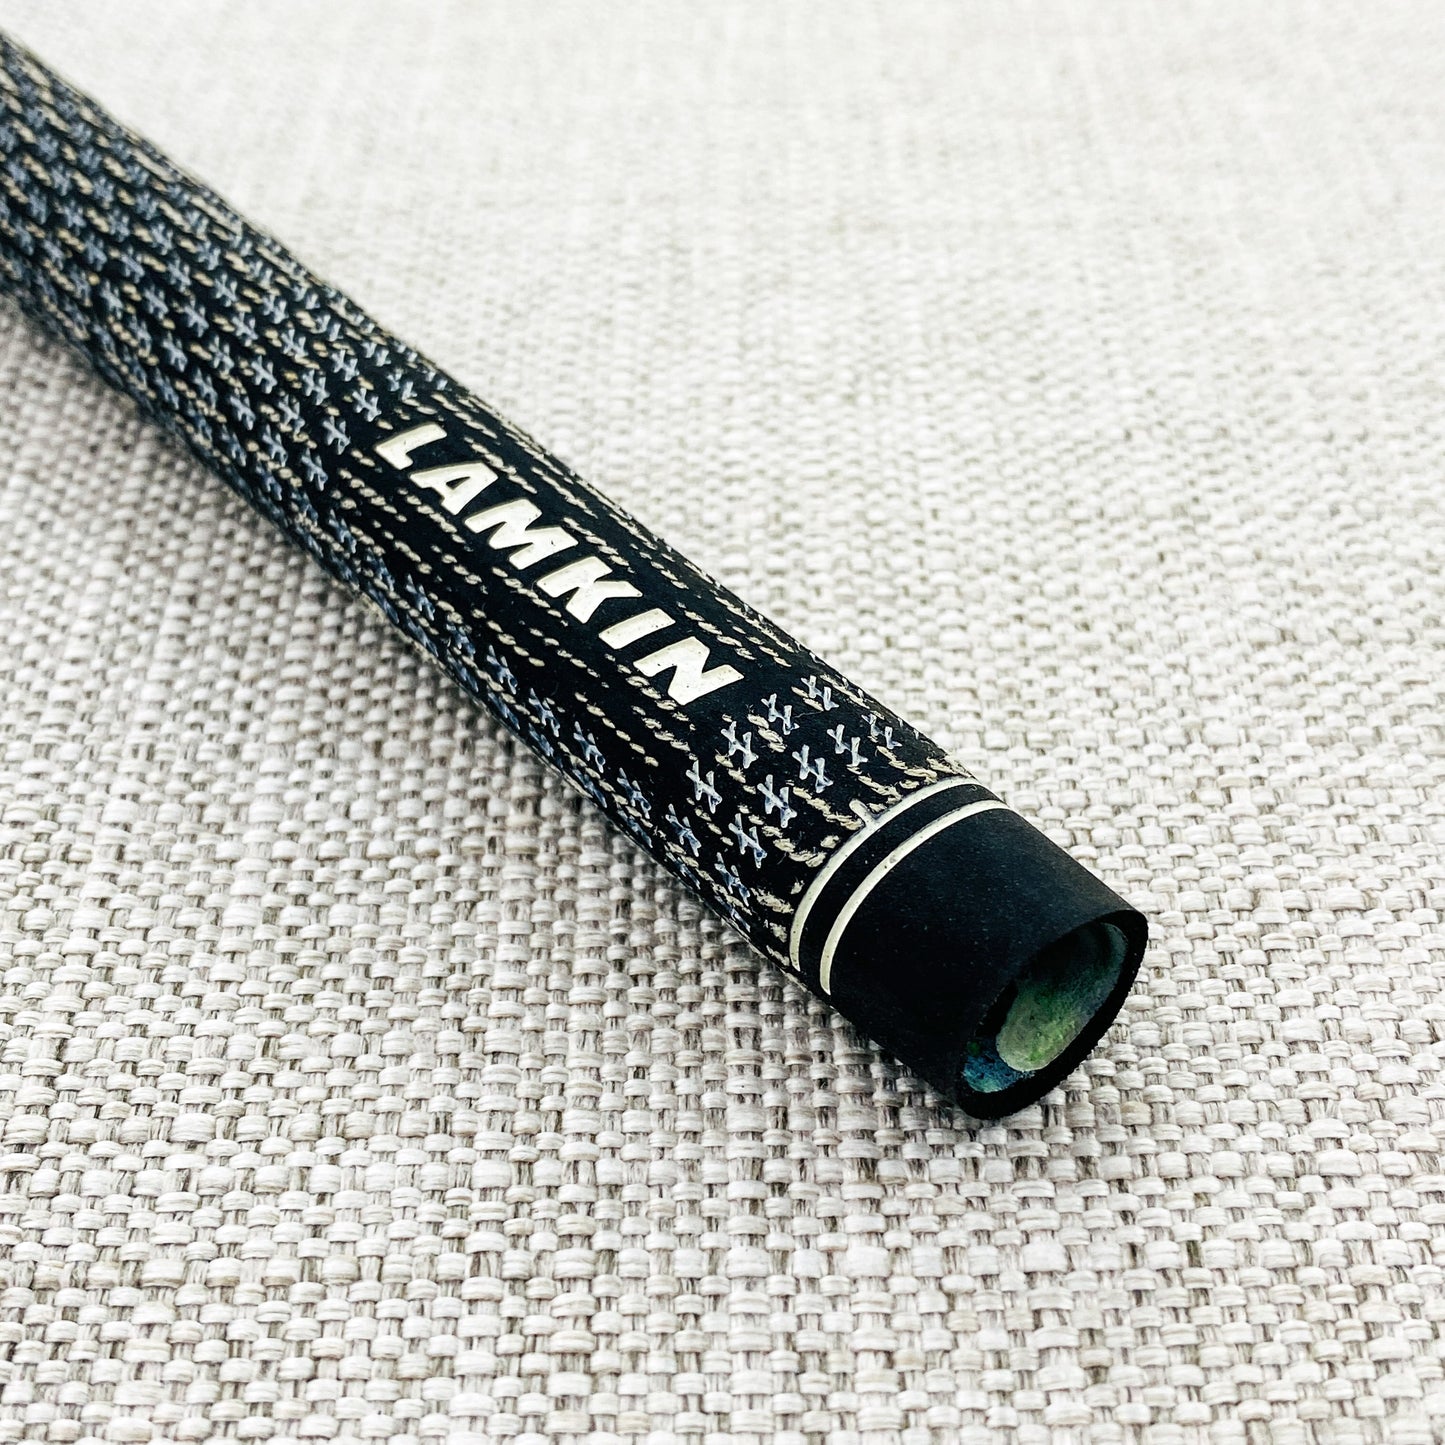 Lamkin Crossline Cord swing grip. Choice of size. Black/White - Price includes fitment.